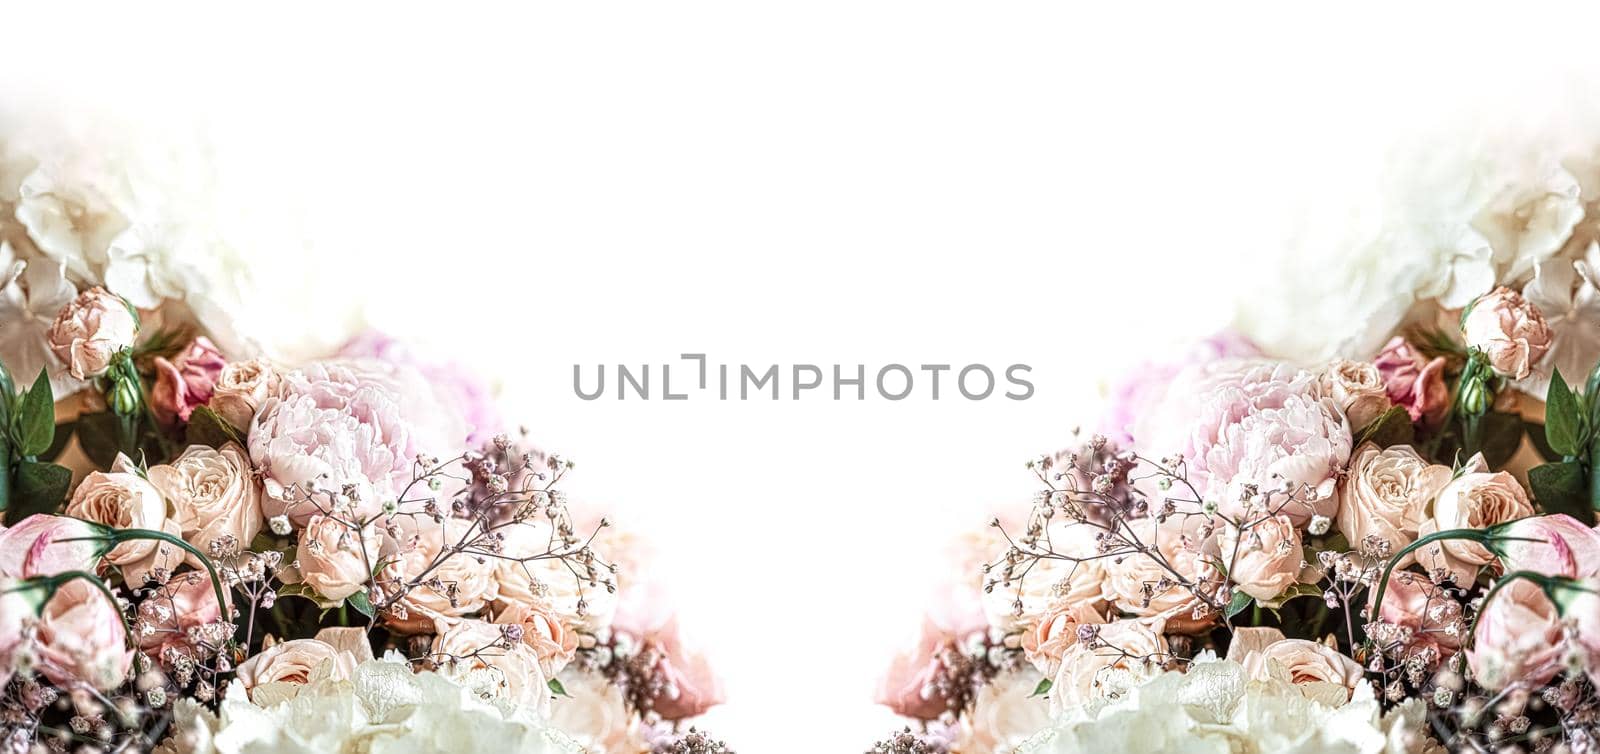 Floral background. Close up bouquet of beautiful flowers. Frame with copy space